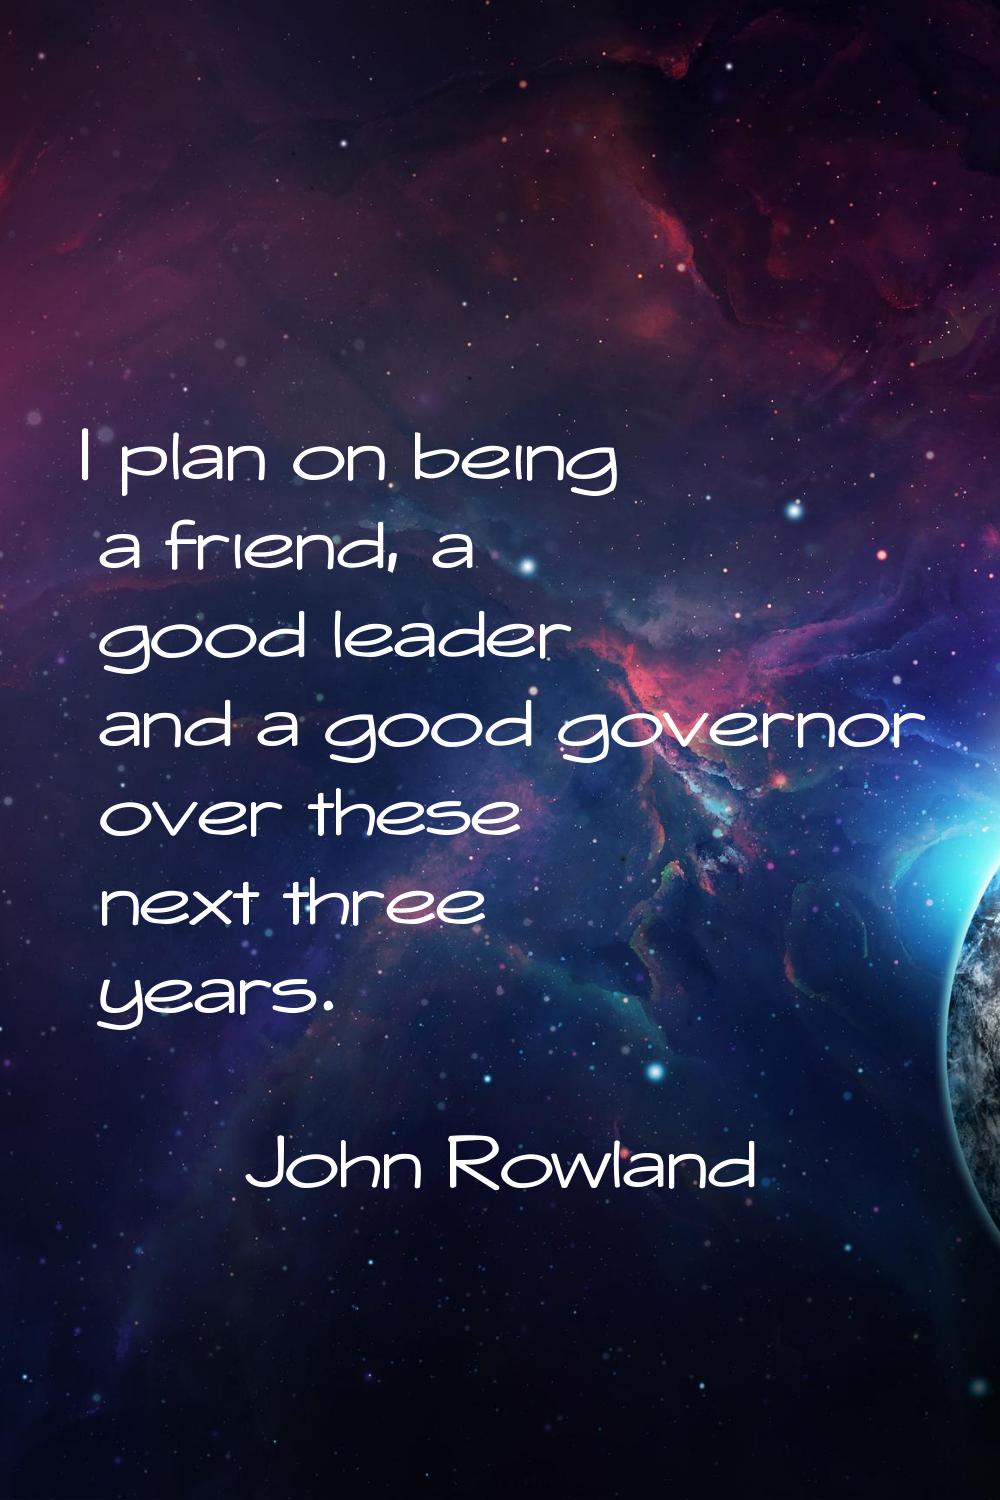 I plan on being a friend, a good leader and a good governor over these next three years.